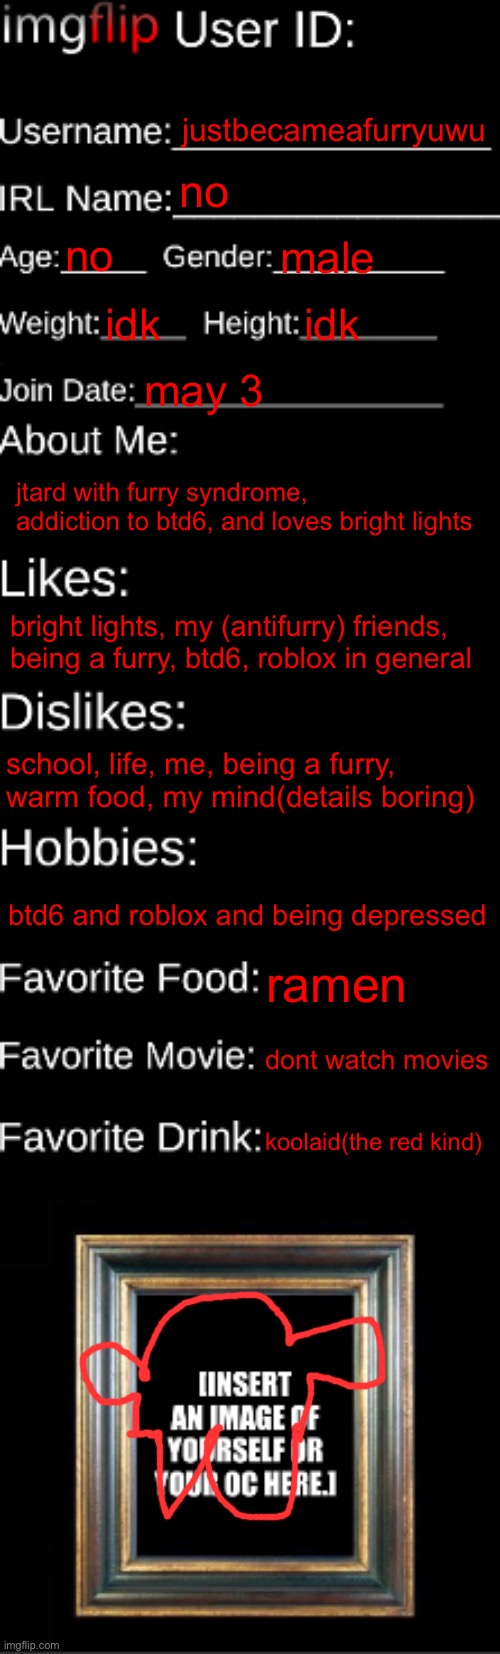 resubmitted bc i deleted previous image | justbecameafurryuwu; no; no; male; idk; idk; may 3; jtard with furry syndrome, addiction to btd6, and loves bright lights; bright lights, my (antifurry) friends, being a furry, btd6, roblox in general; school, life, me, being a furry, warm food, my mind(details boring); btd6 and roblox and being depressed; ramen; dont watch movies; koolaid(the red kind) | image tagged in imgflip id card,hi tyler | made w/ Imgflip meme maker